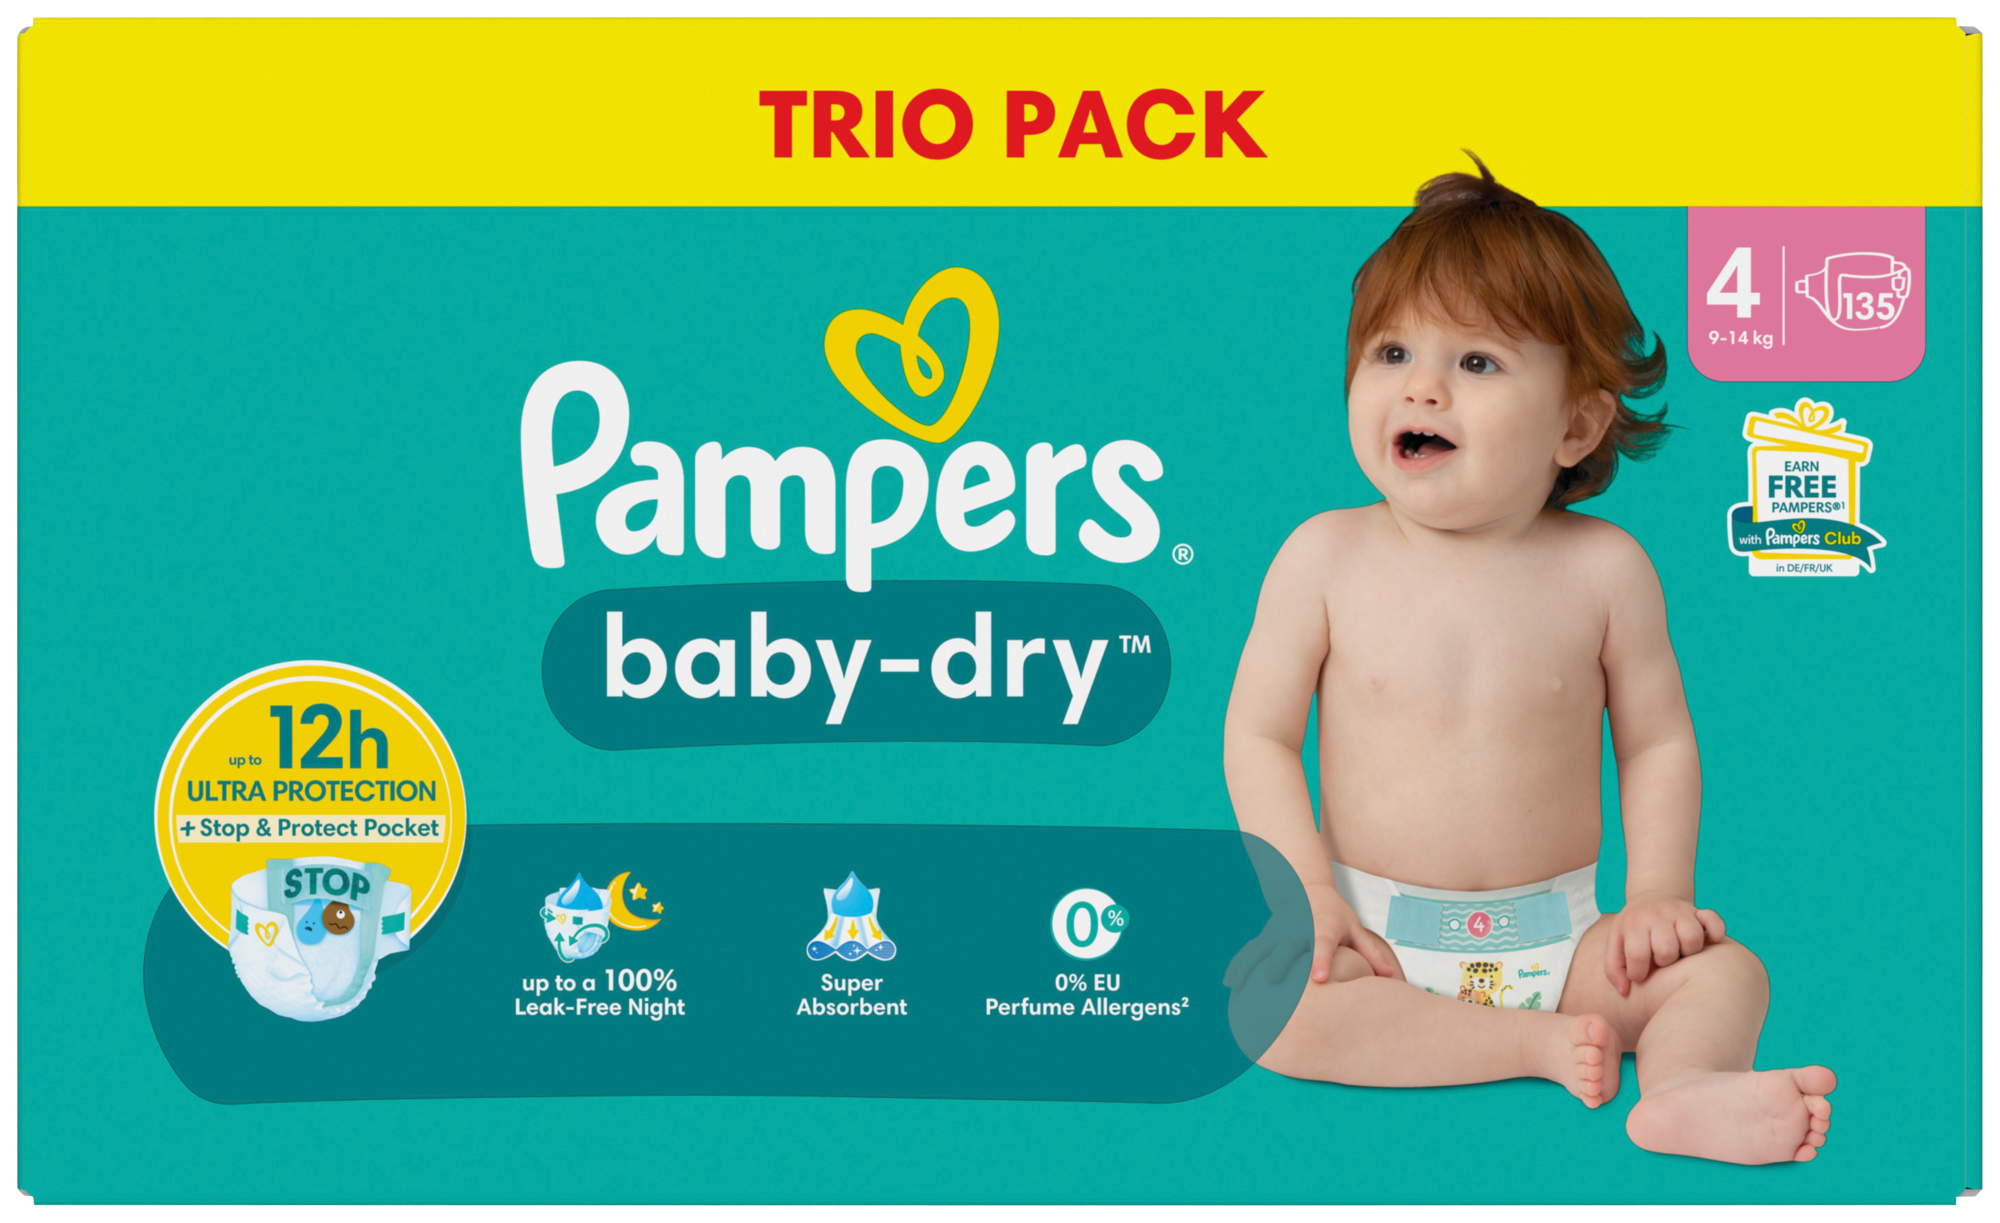 CHANGES BEBE
"PAMPERS BABY DRY"